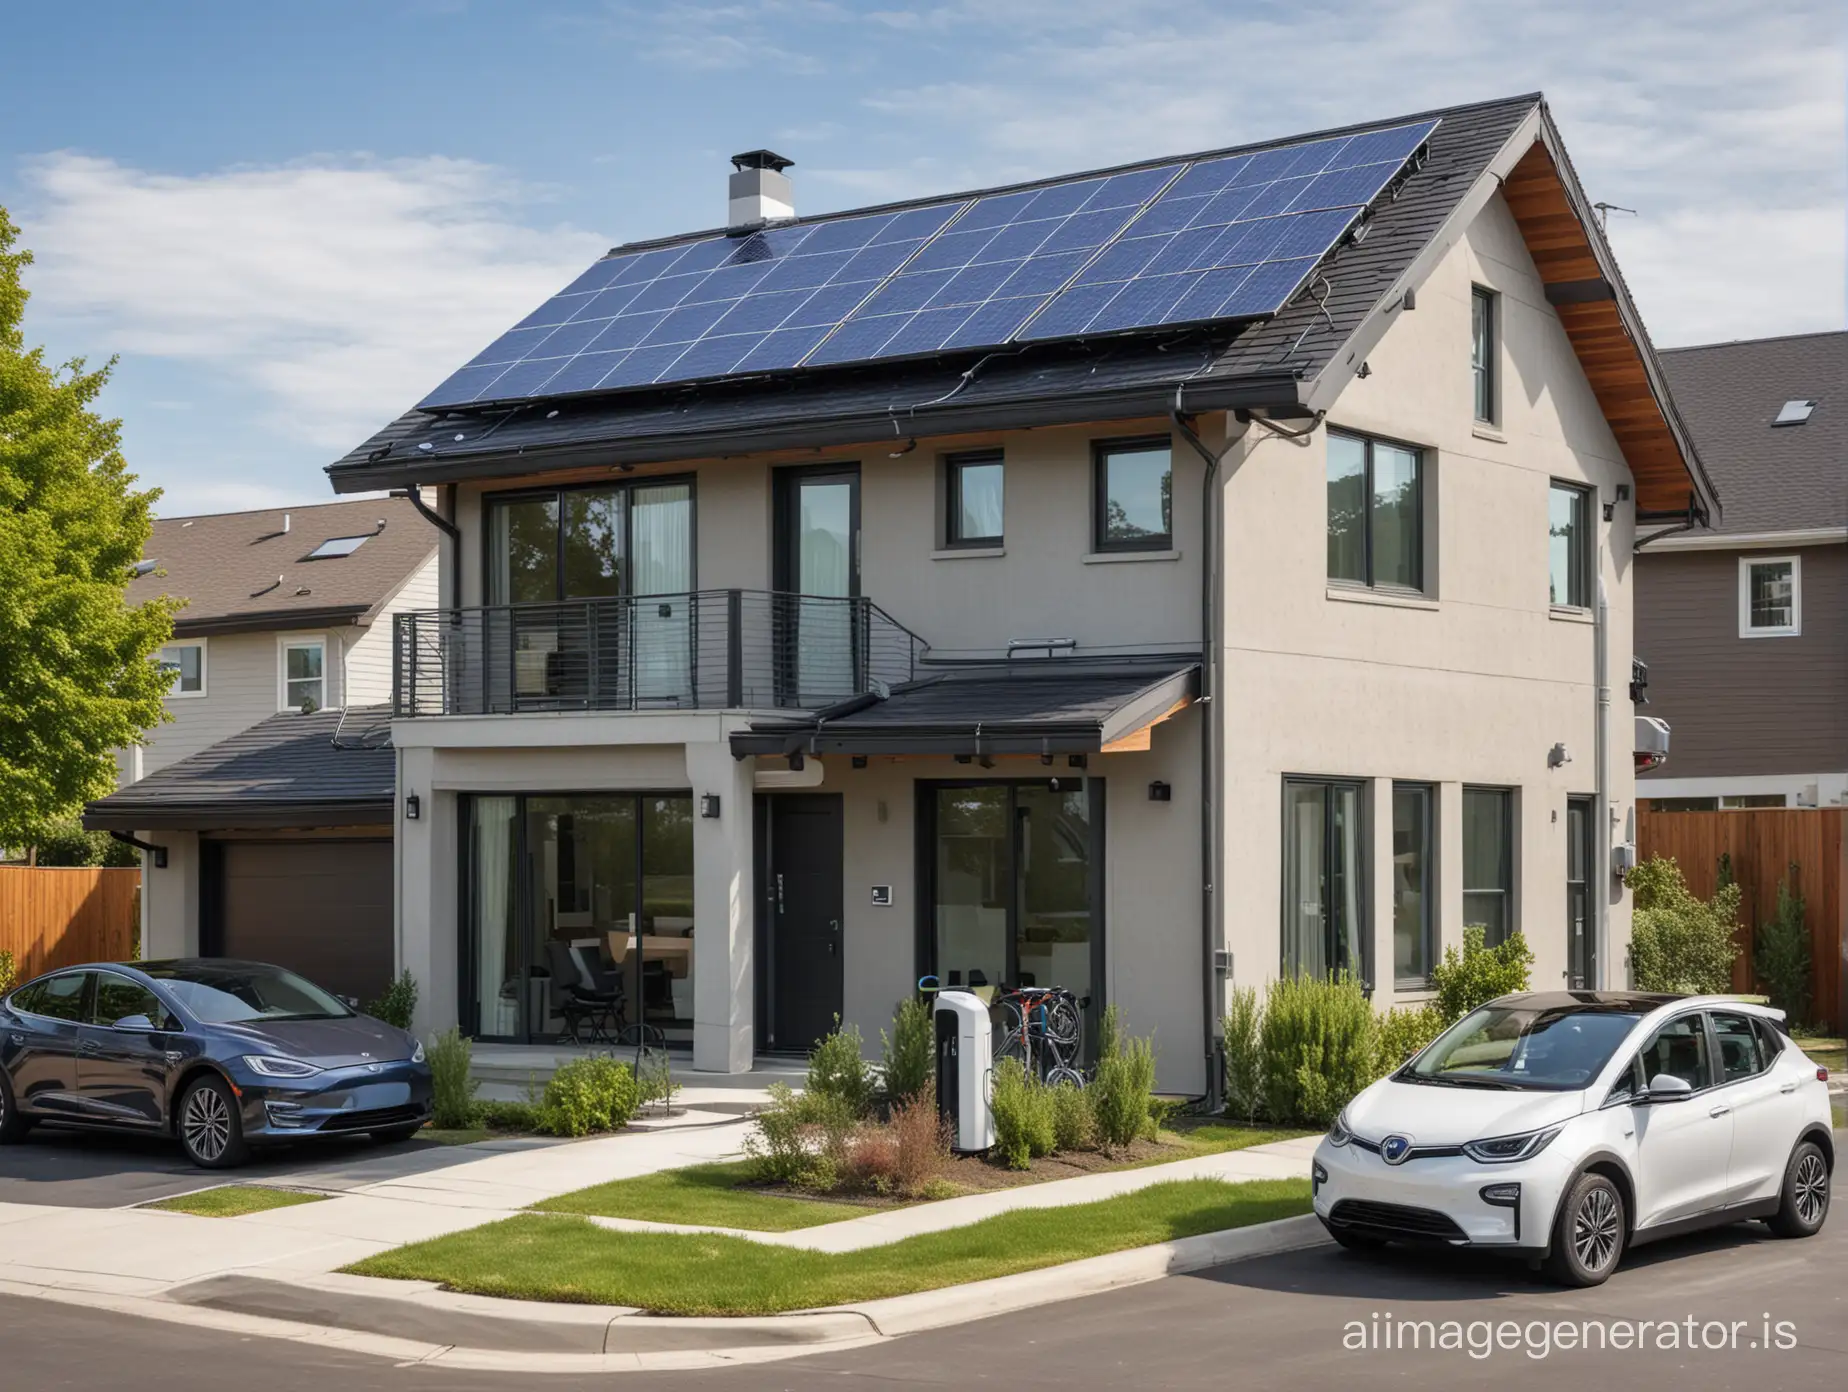 A two-story residential house with solar panels on the roof and an electric car connected to a charging station."